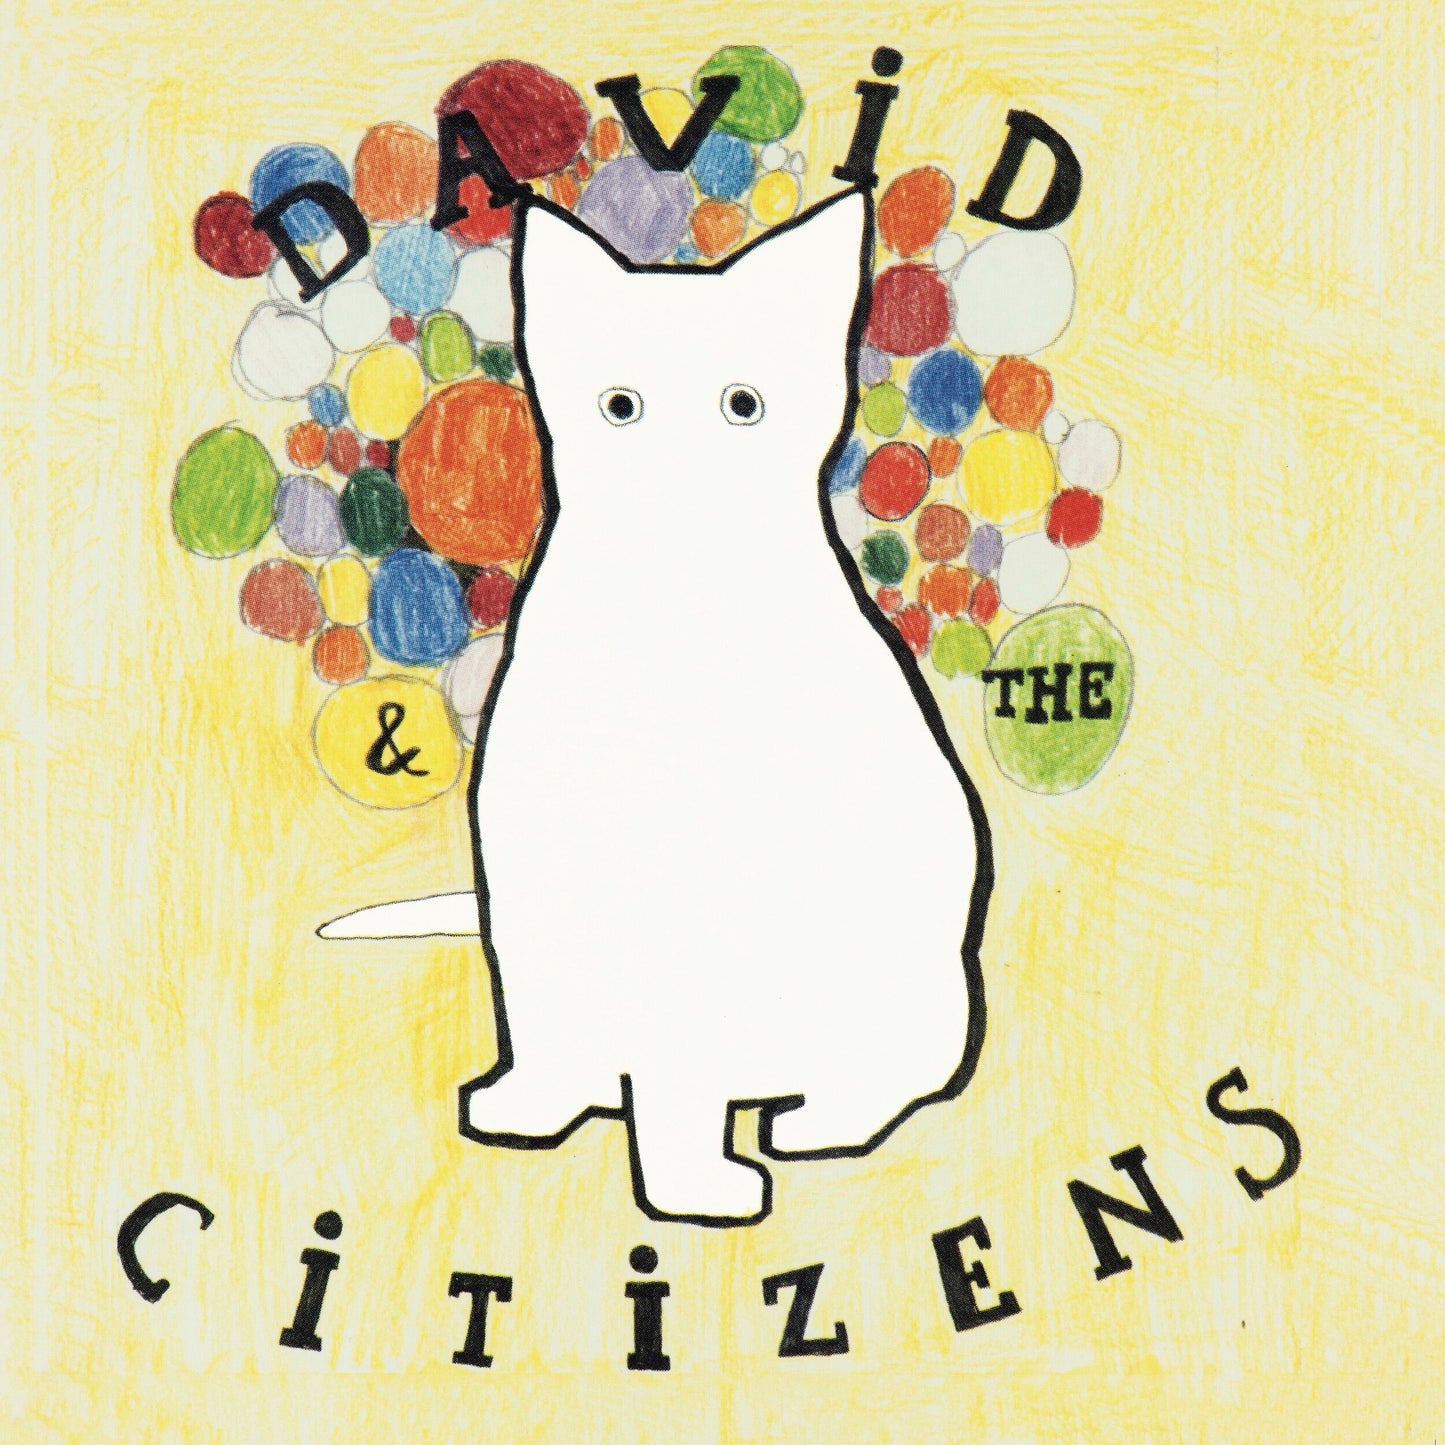 David and the Citizens - Beppe + I’ve Been Floating Upstream